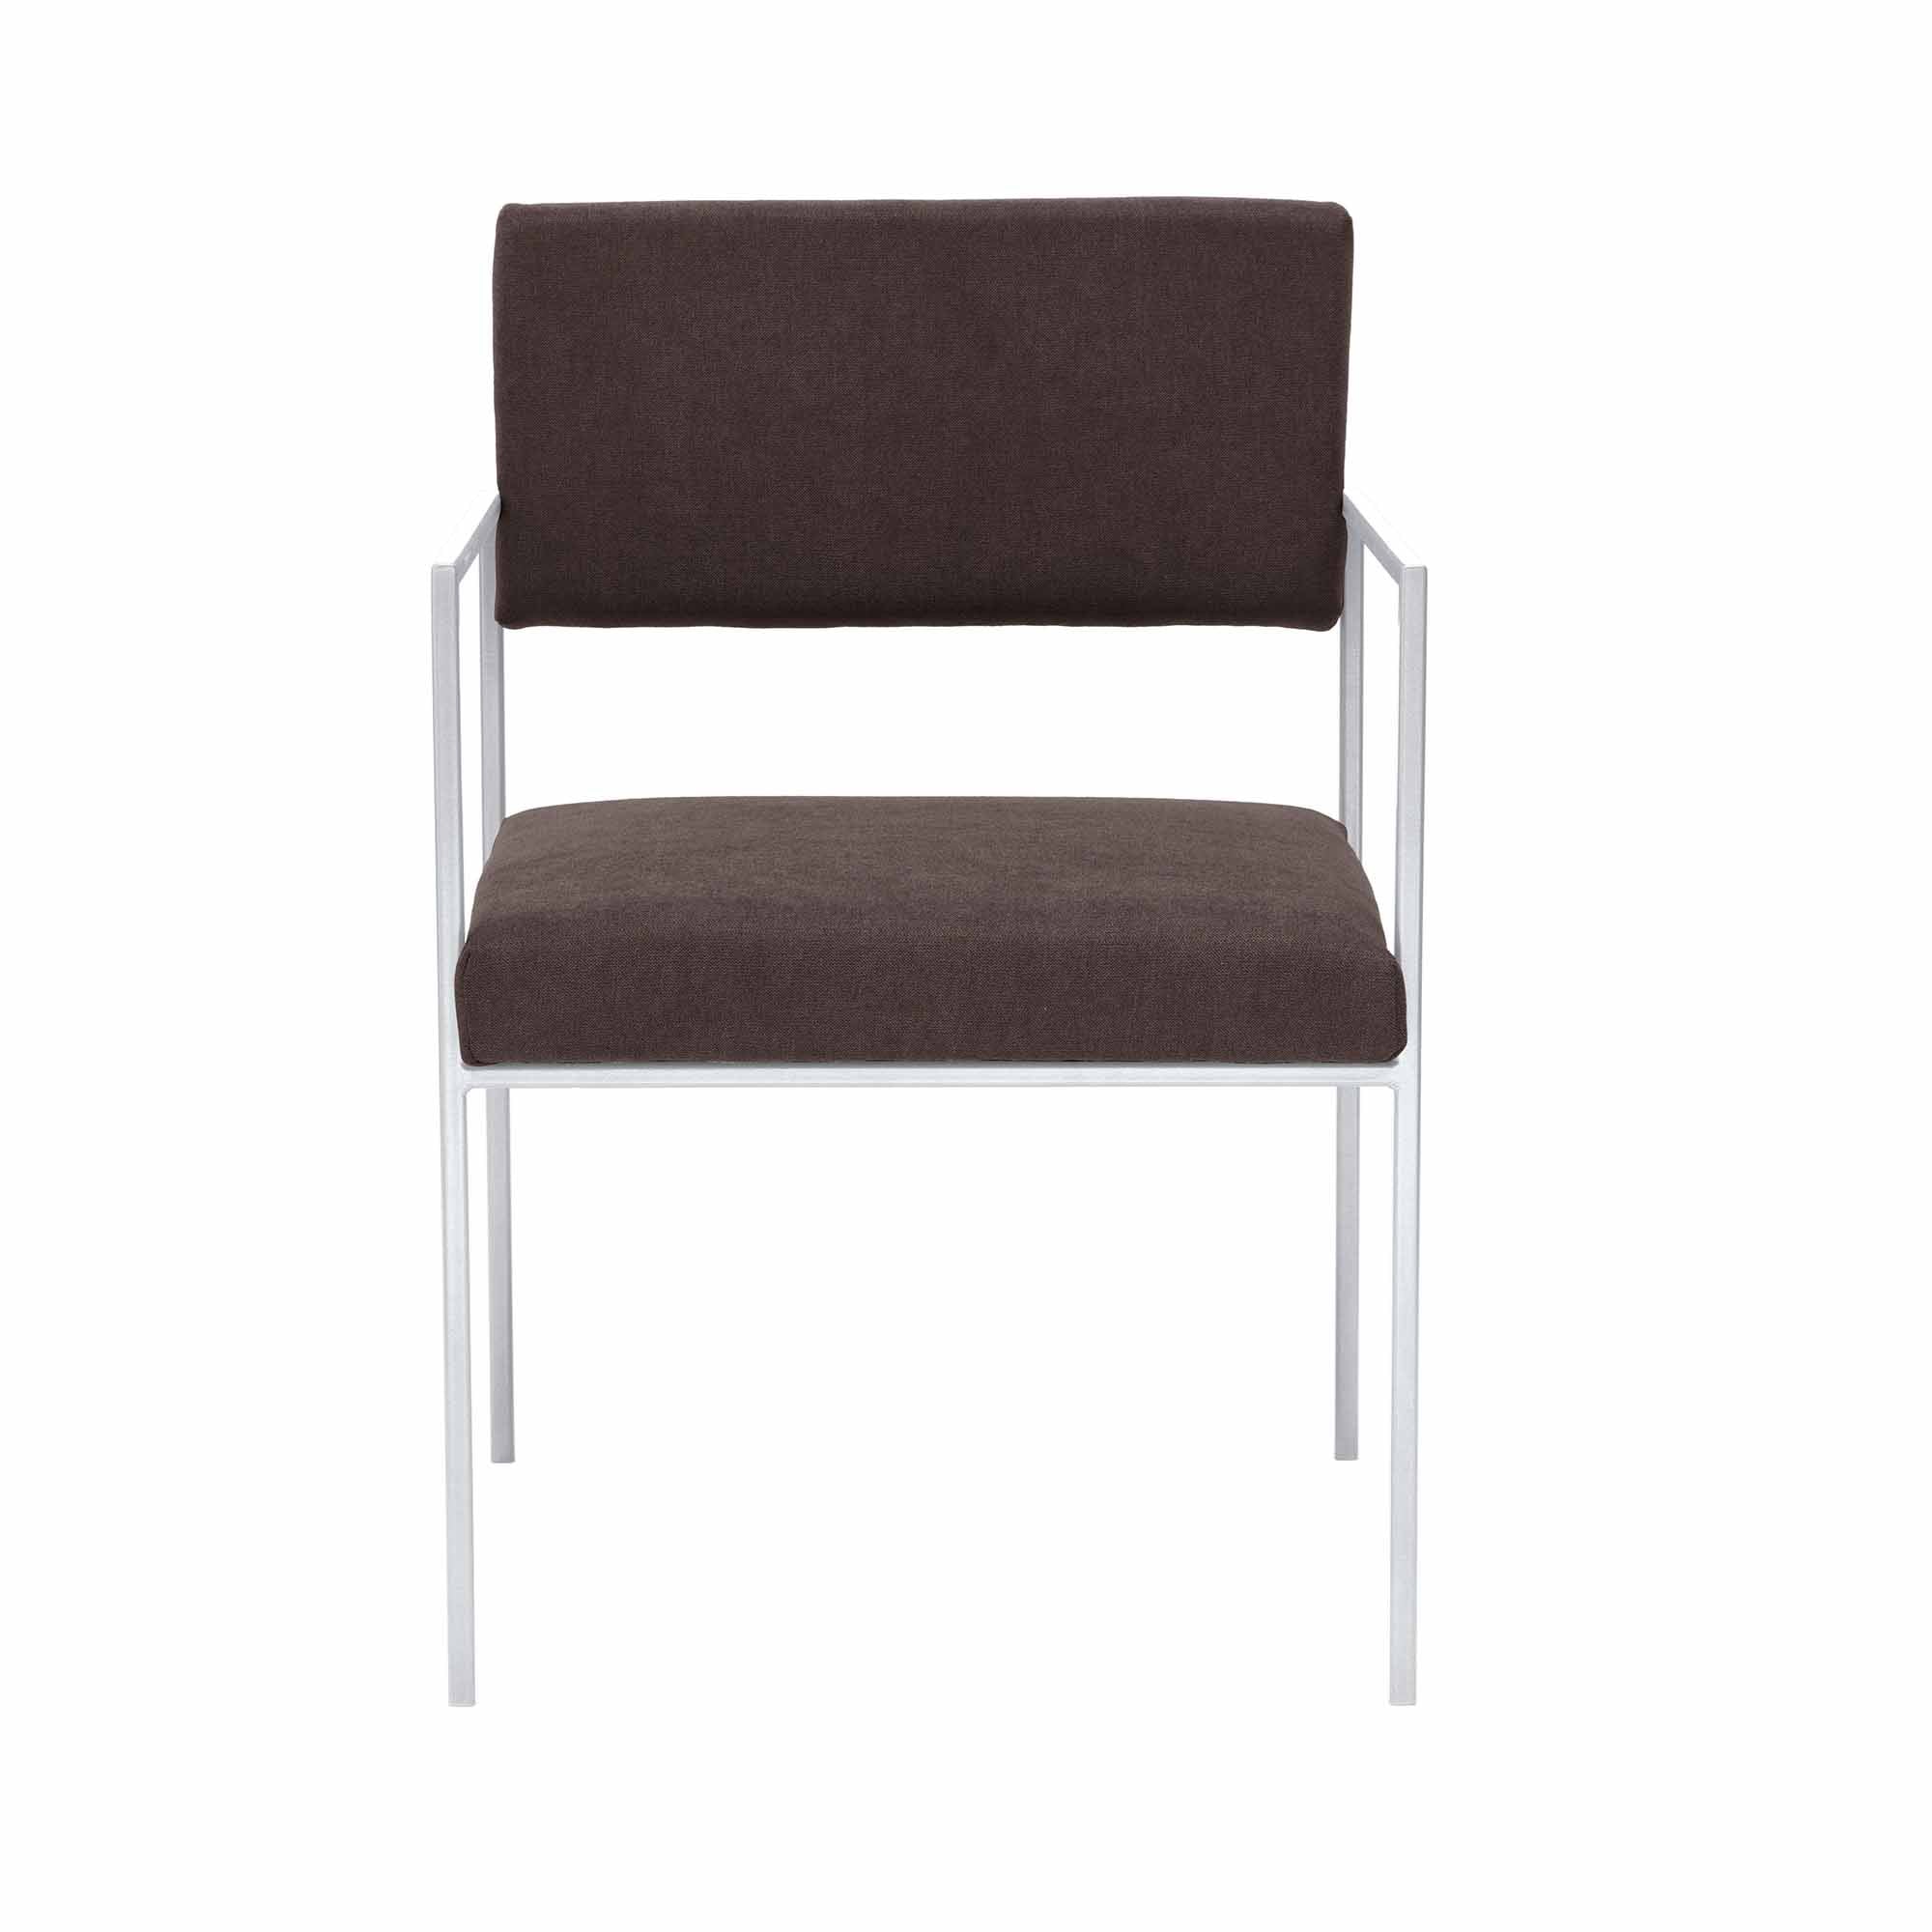 CUBE Armchair, Powder-Coated Steel Frame brown fabric, white frame front view